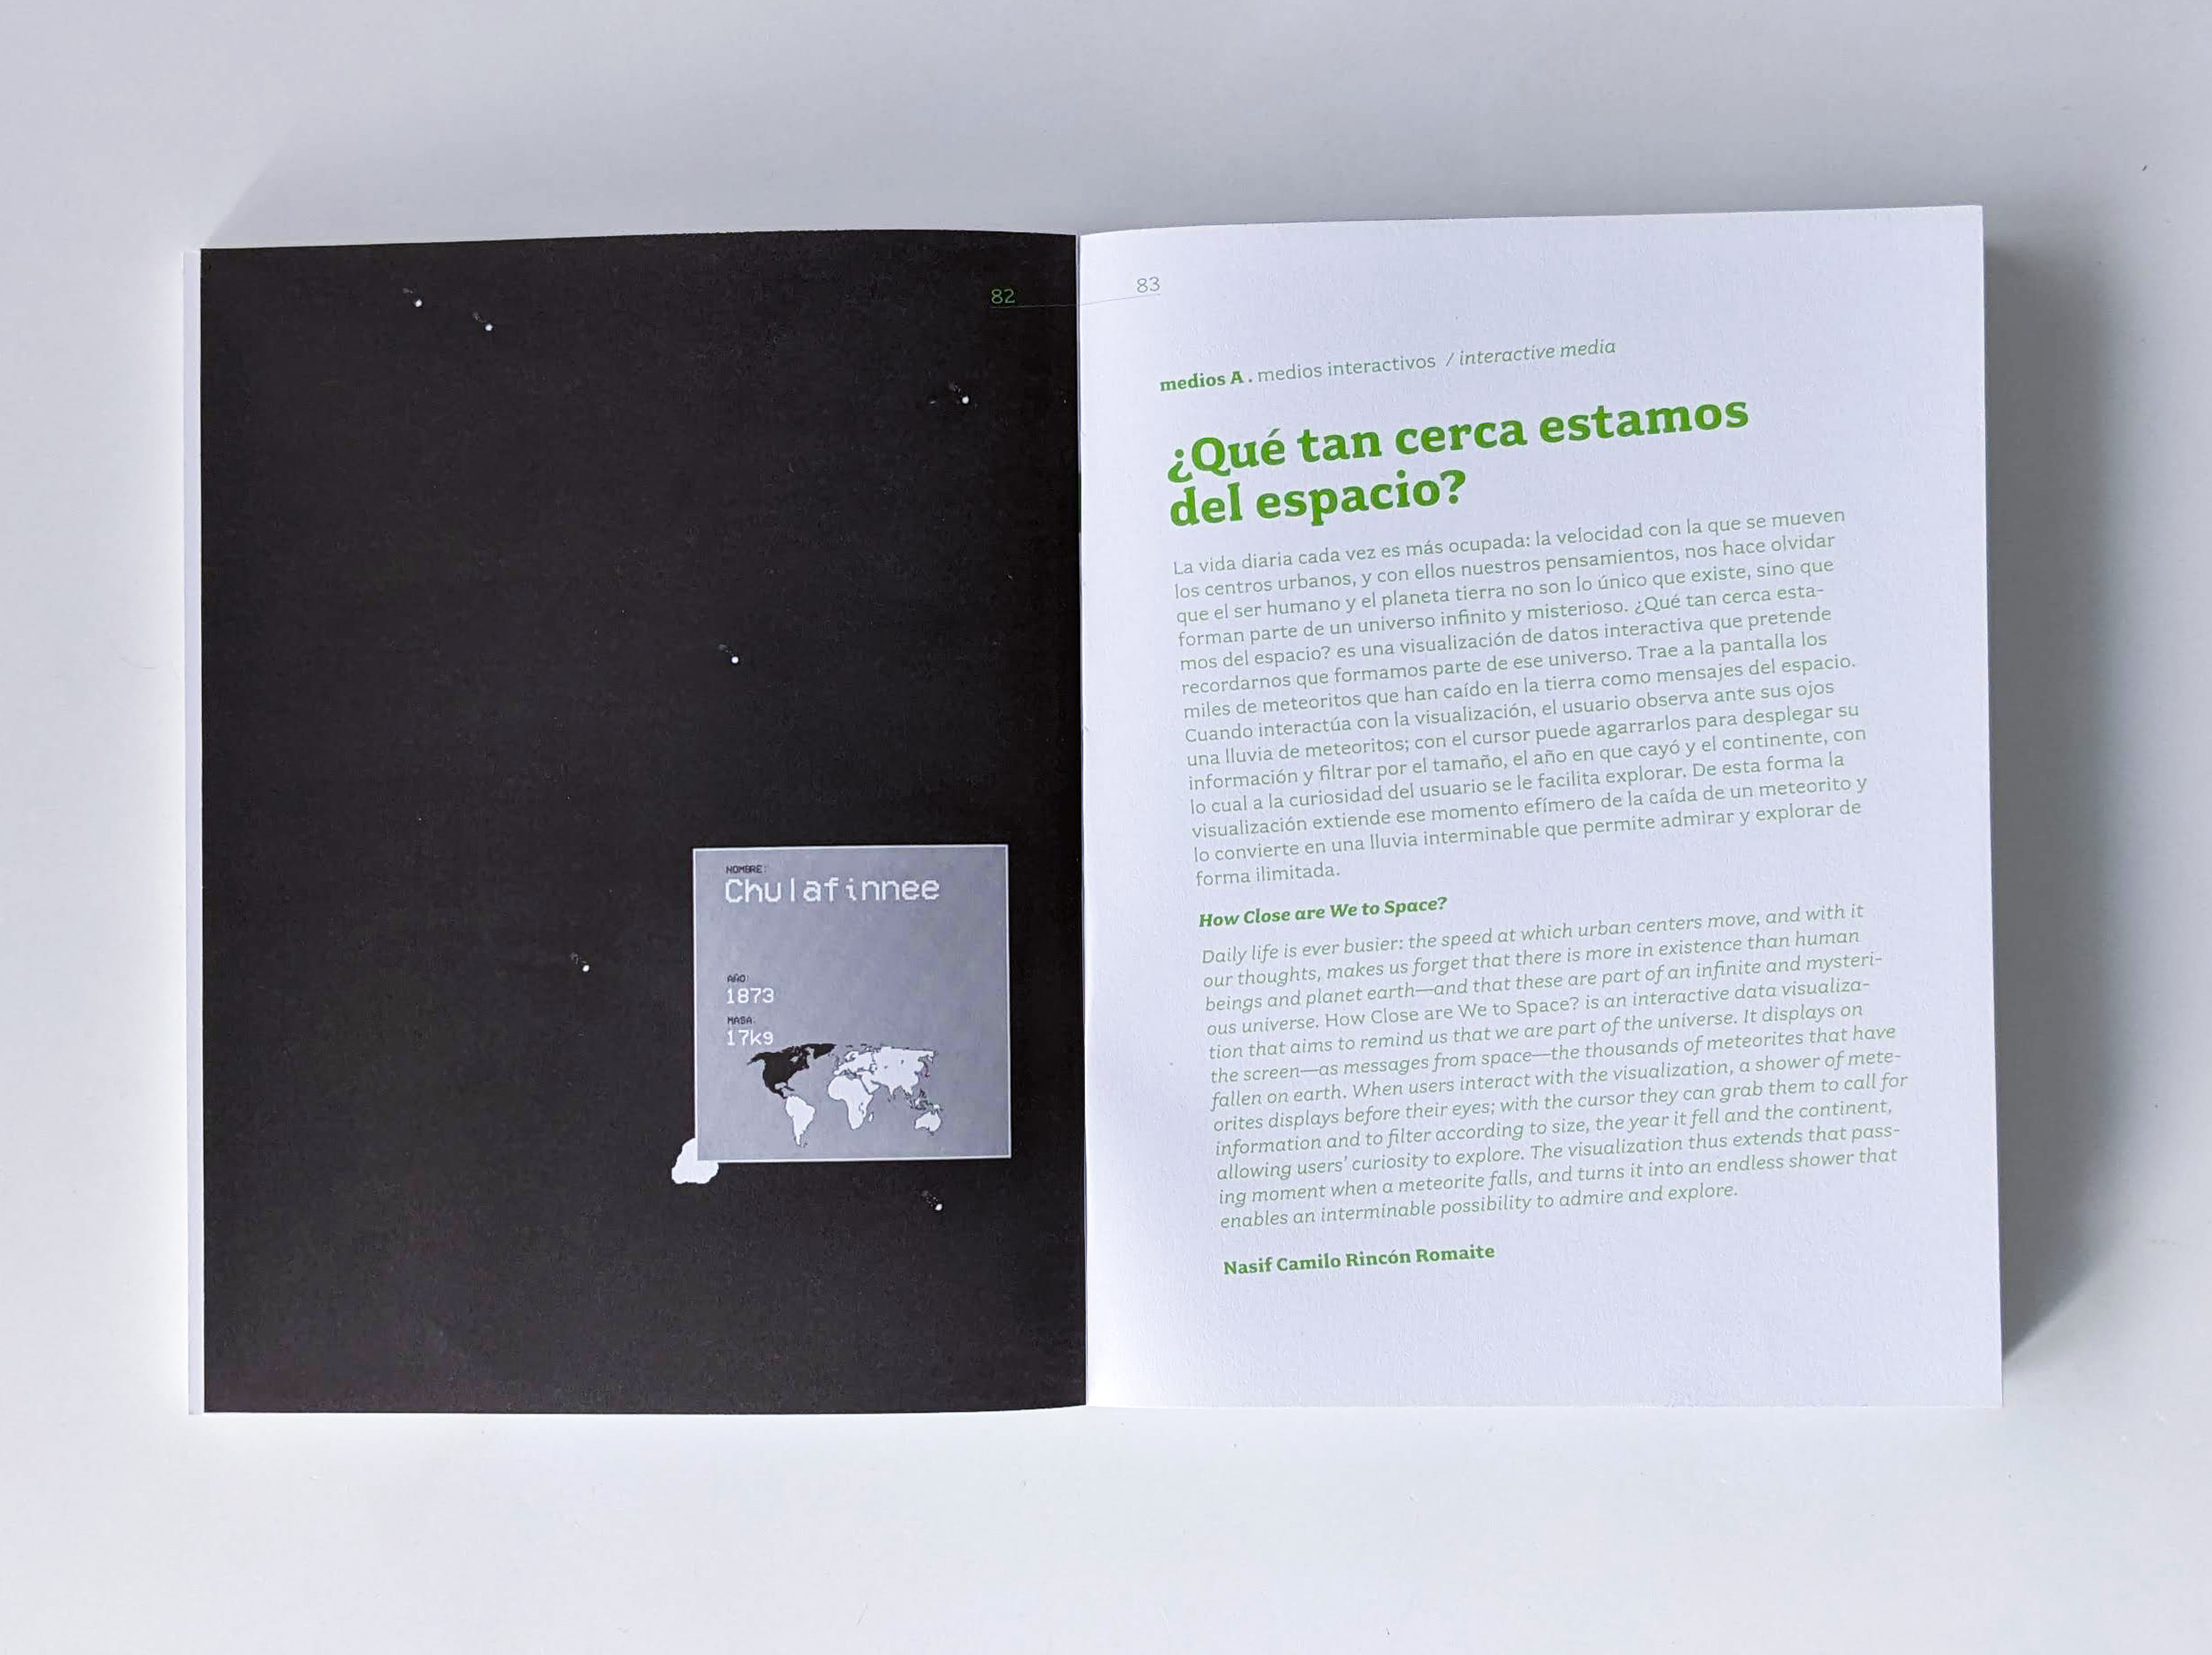 'How far is outer space?' on the 'Andando' exhibition book